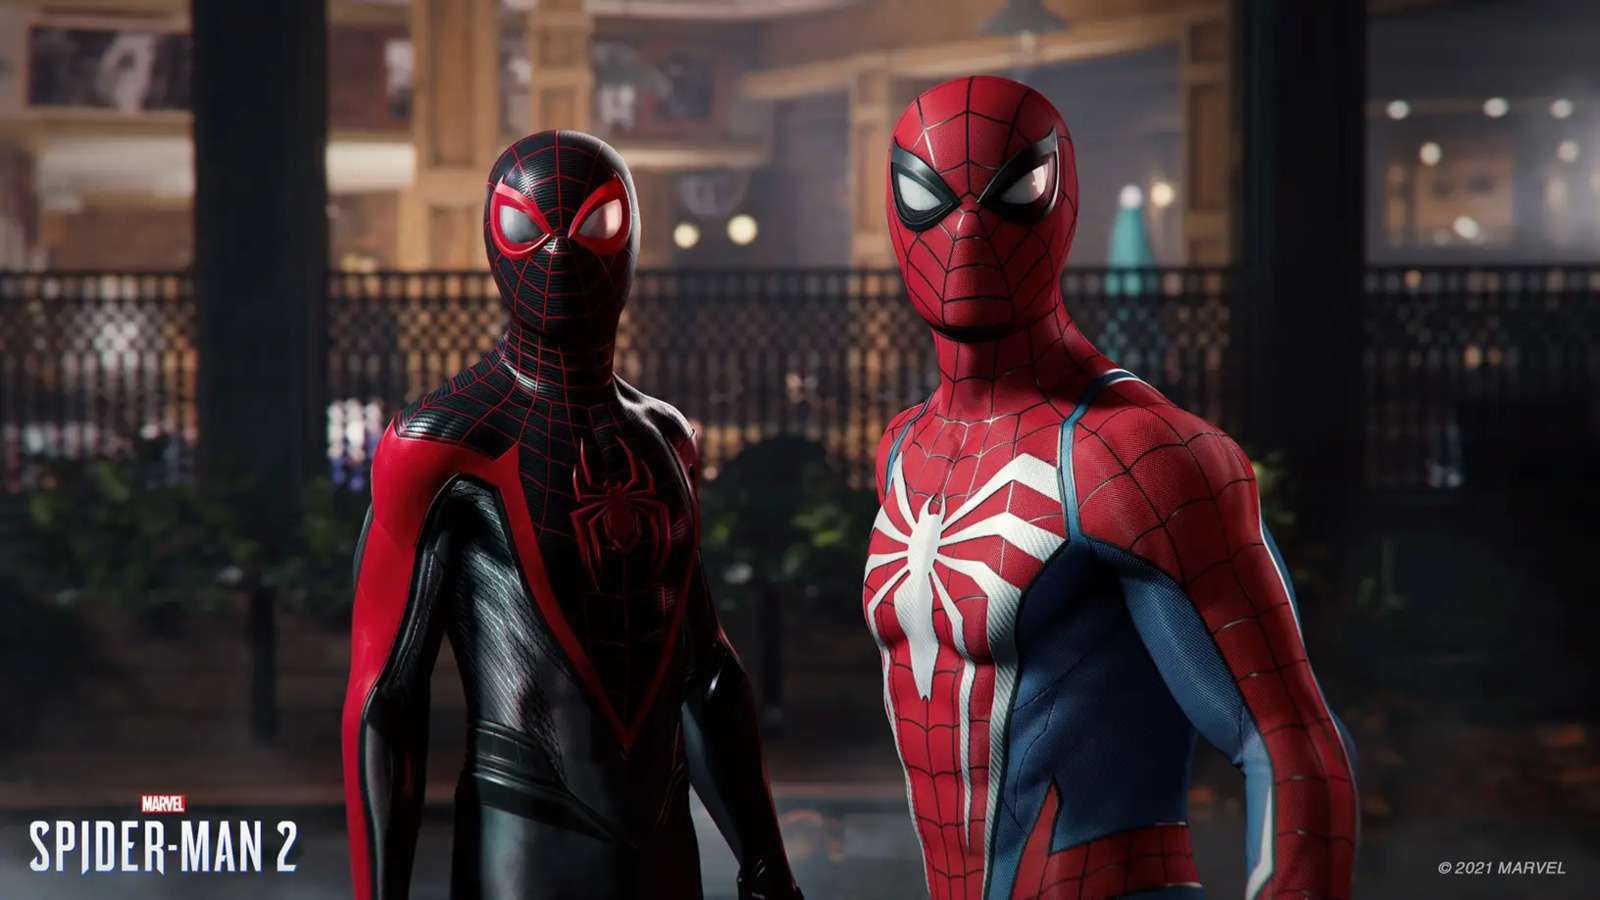 Peter Parker and Miles Morales stand together in Spider-Man 2